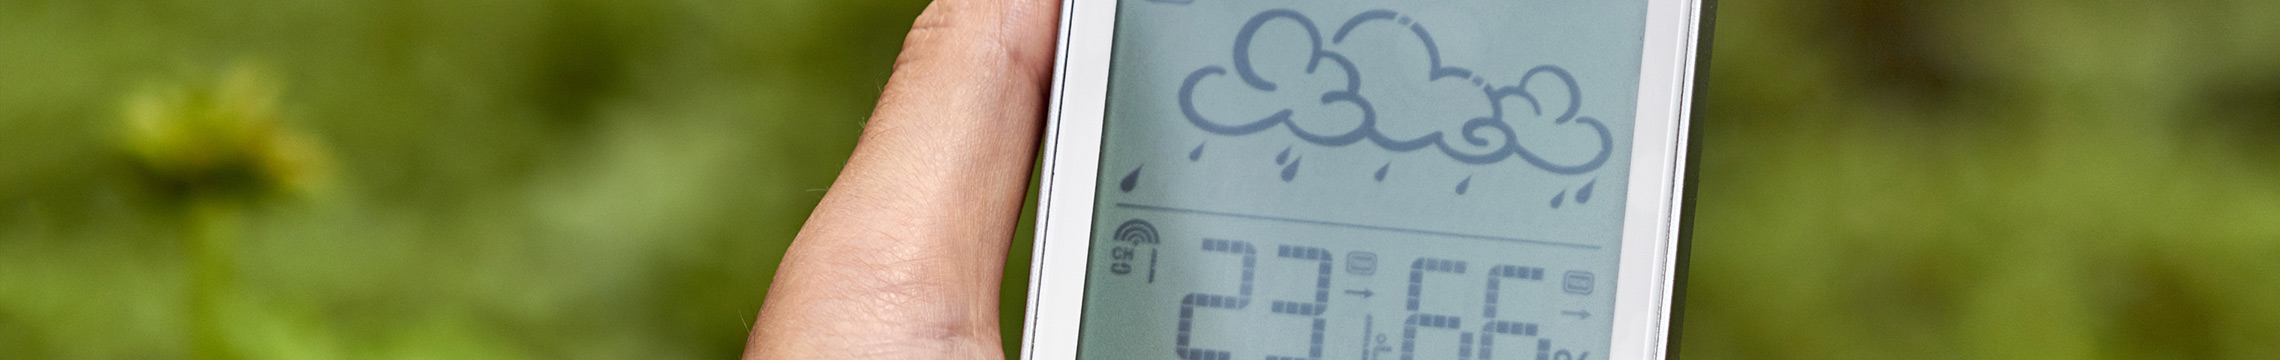 Digital thermometer being held to display the weather stats